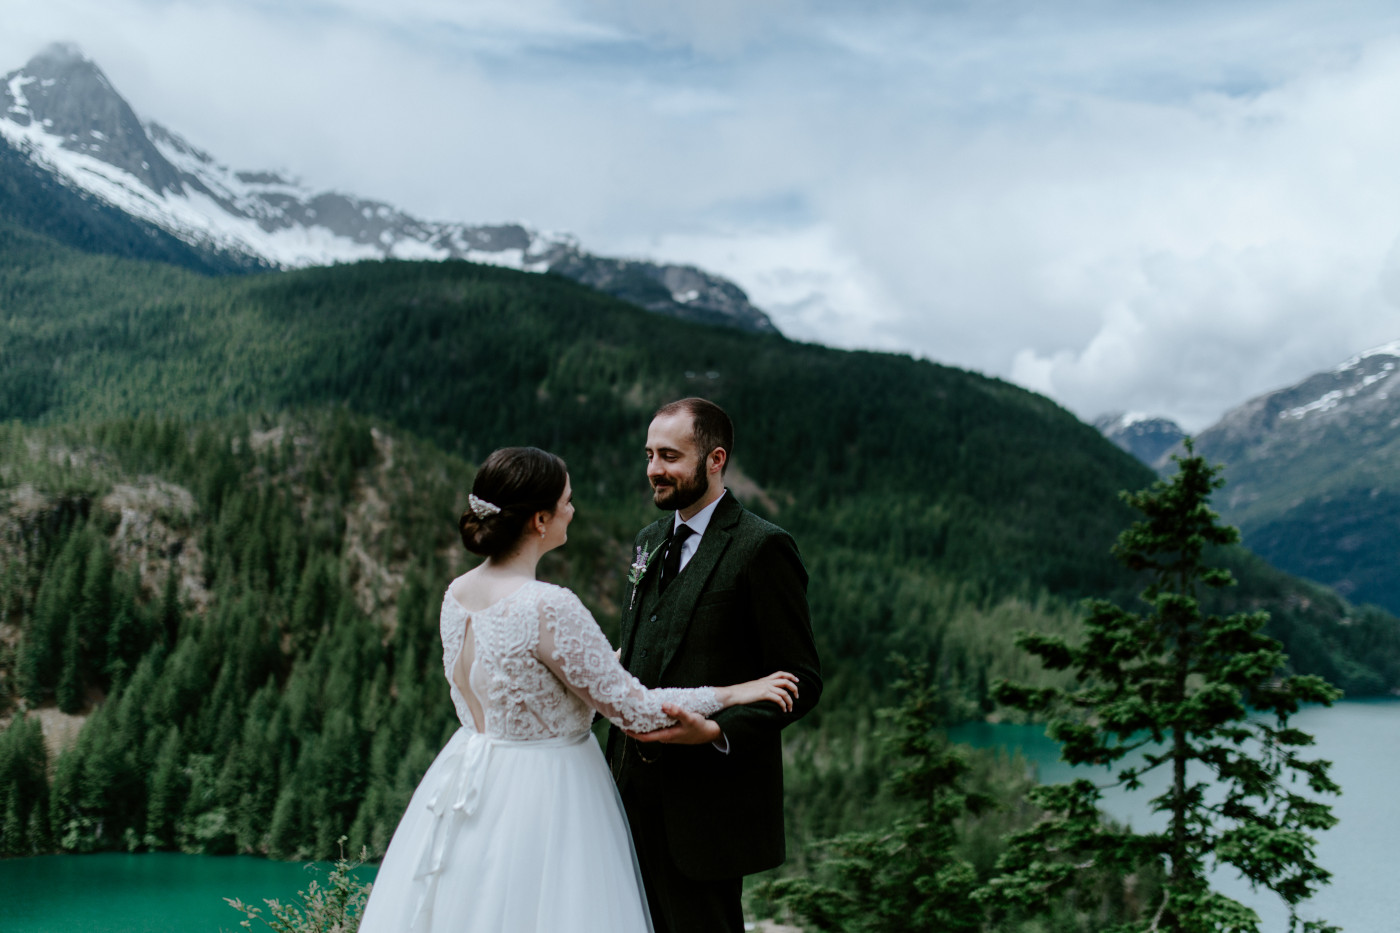 Elizabeth and Alex share a moment. Elopement photography at North Cascades National Park by Sienna Plus Josh.